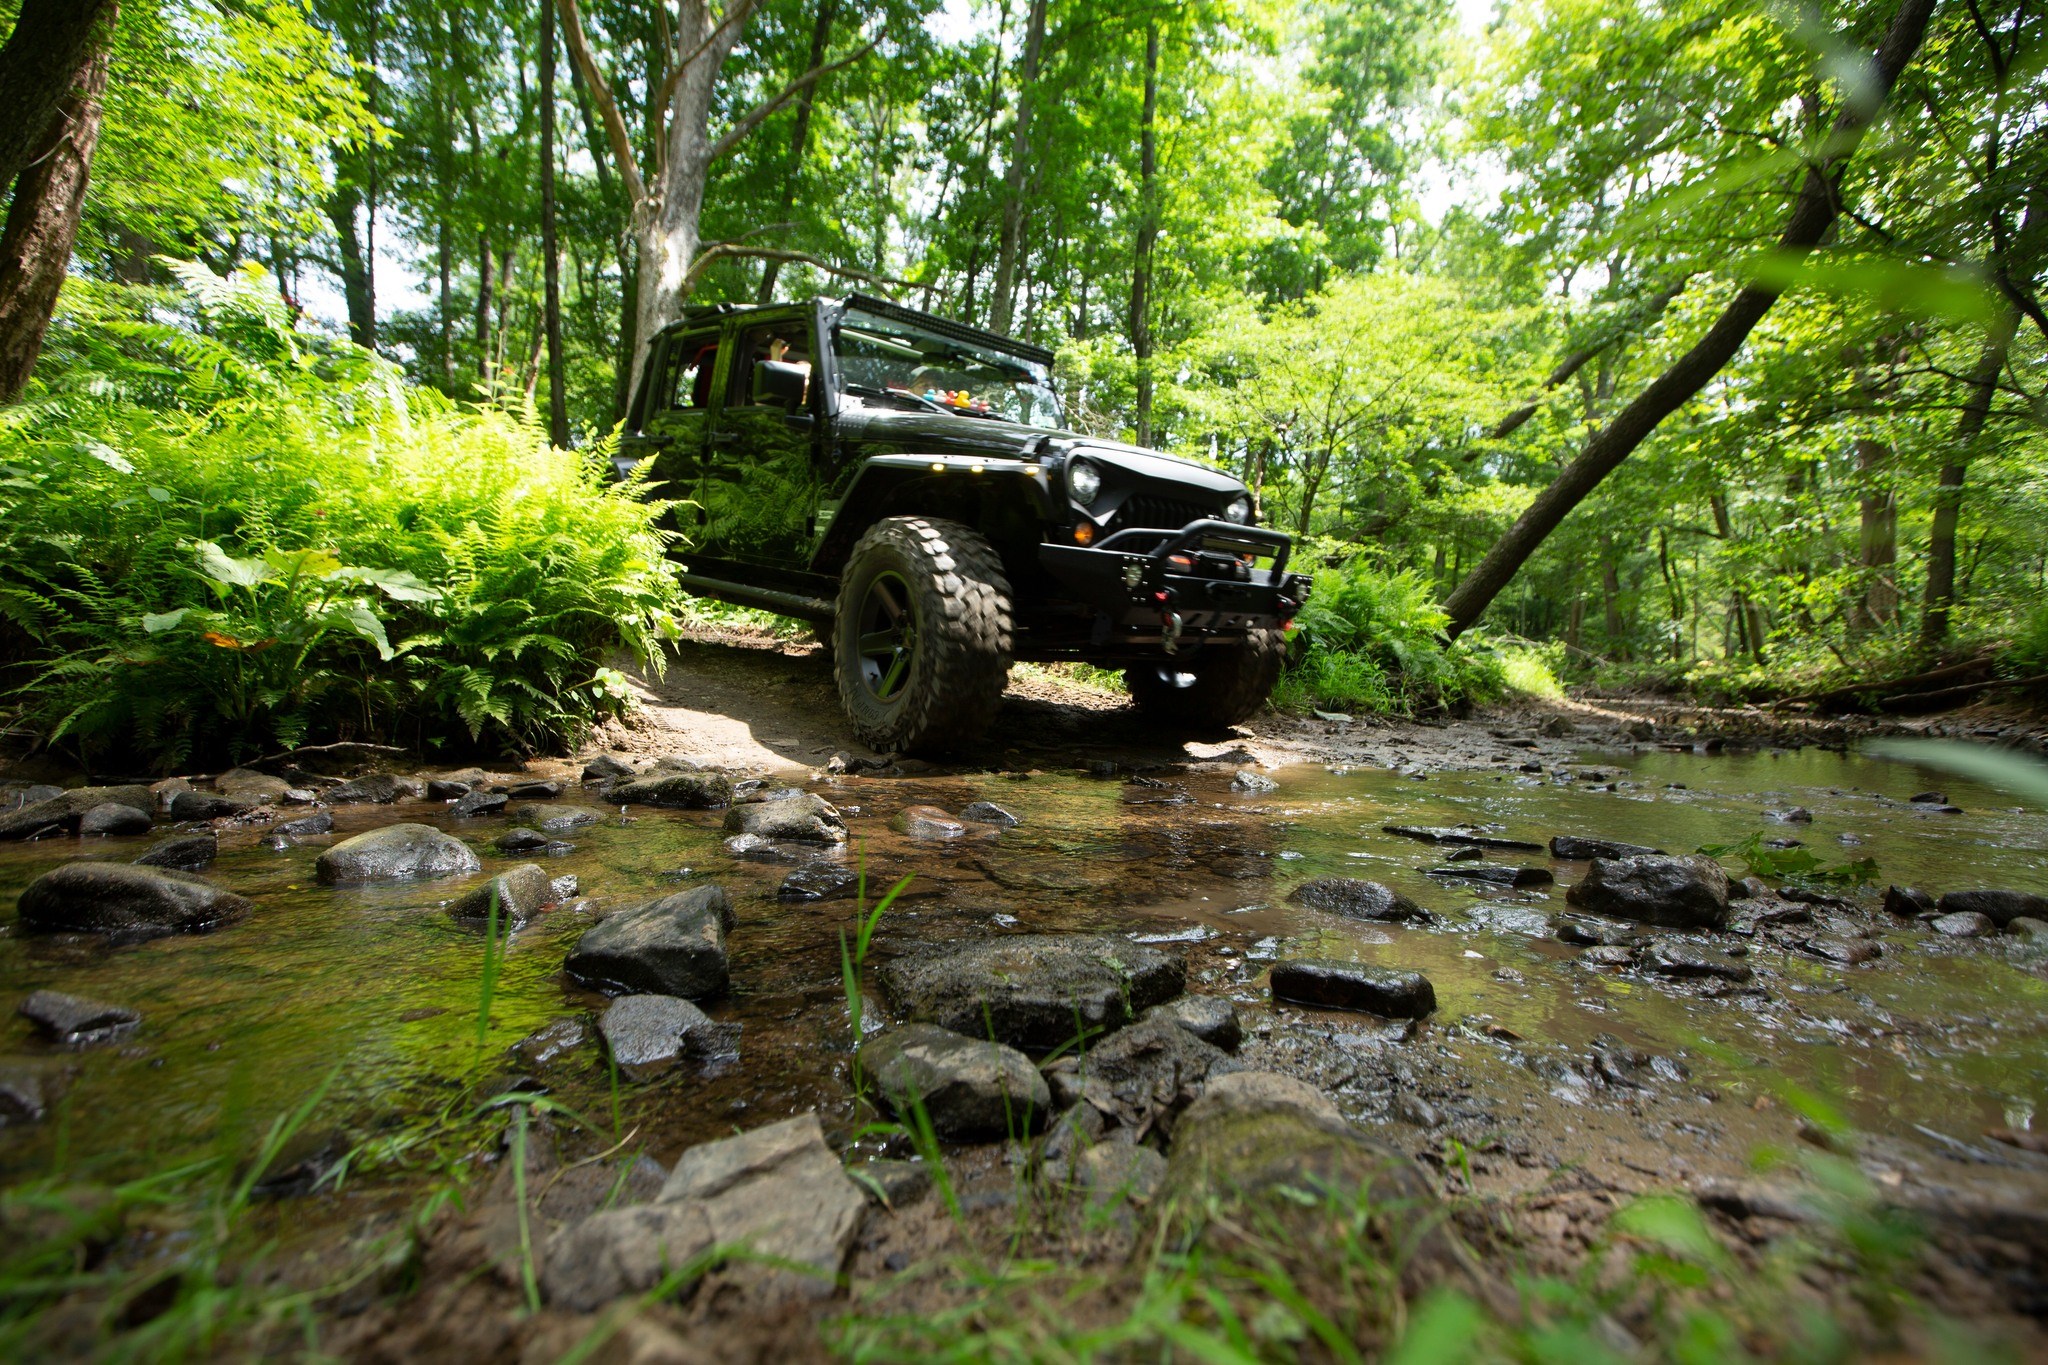 Ten Miles 4 Two Mile Jeep Run Returns for 4th Year